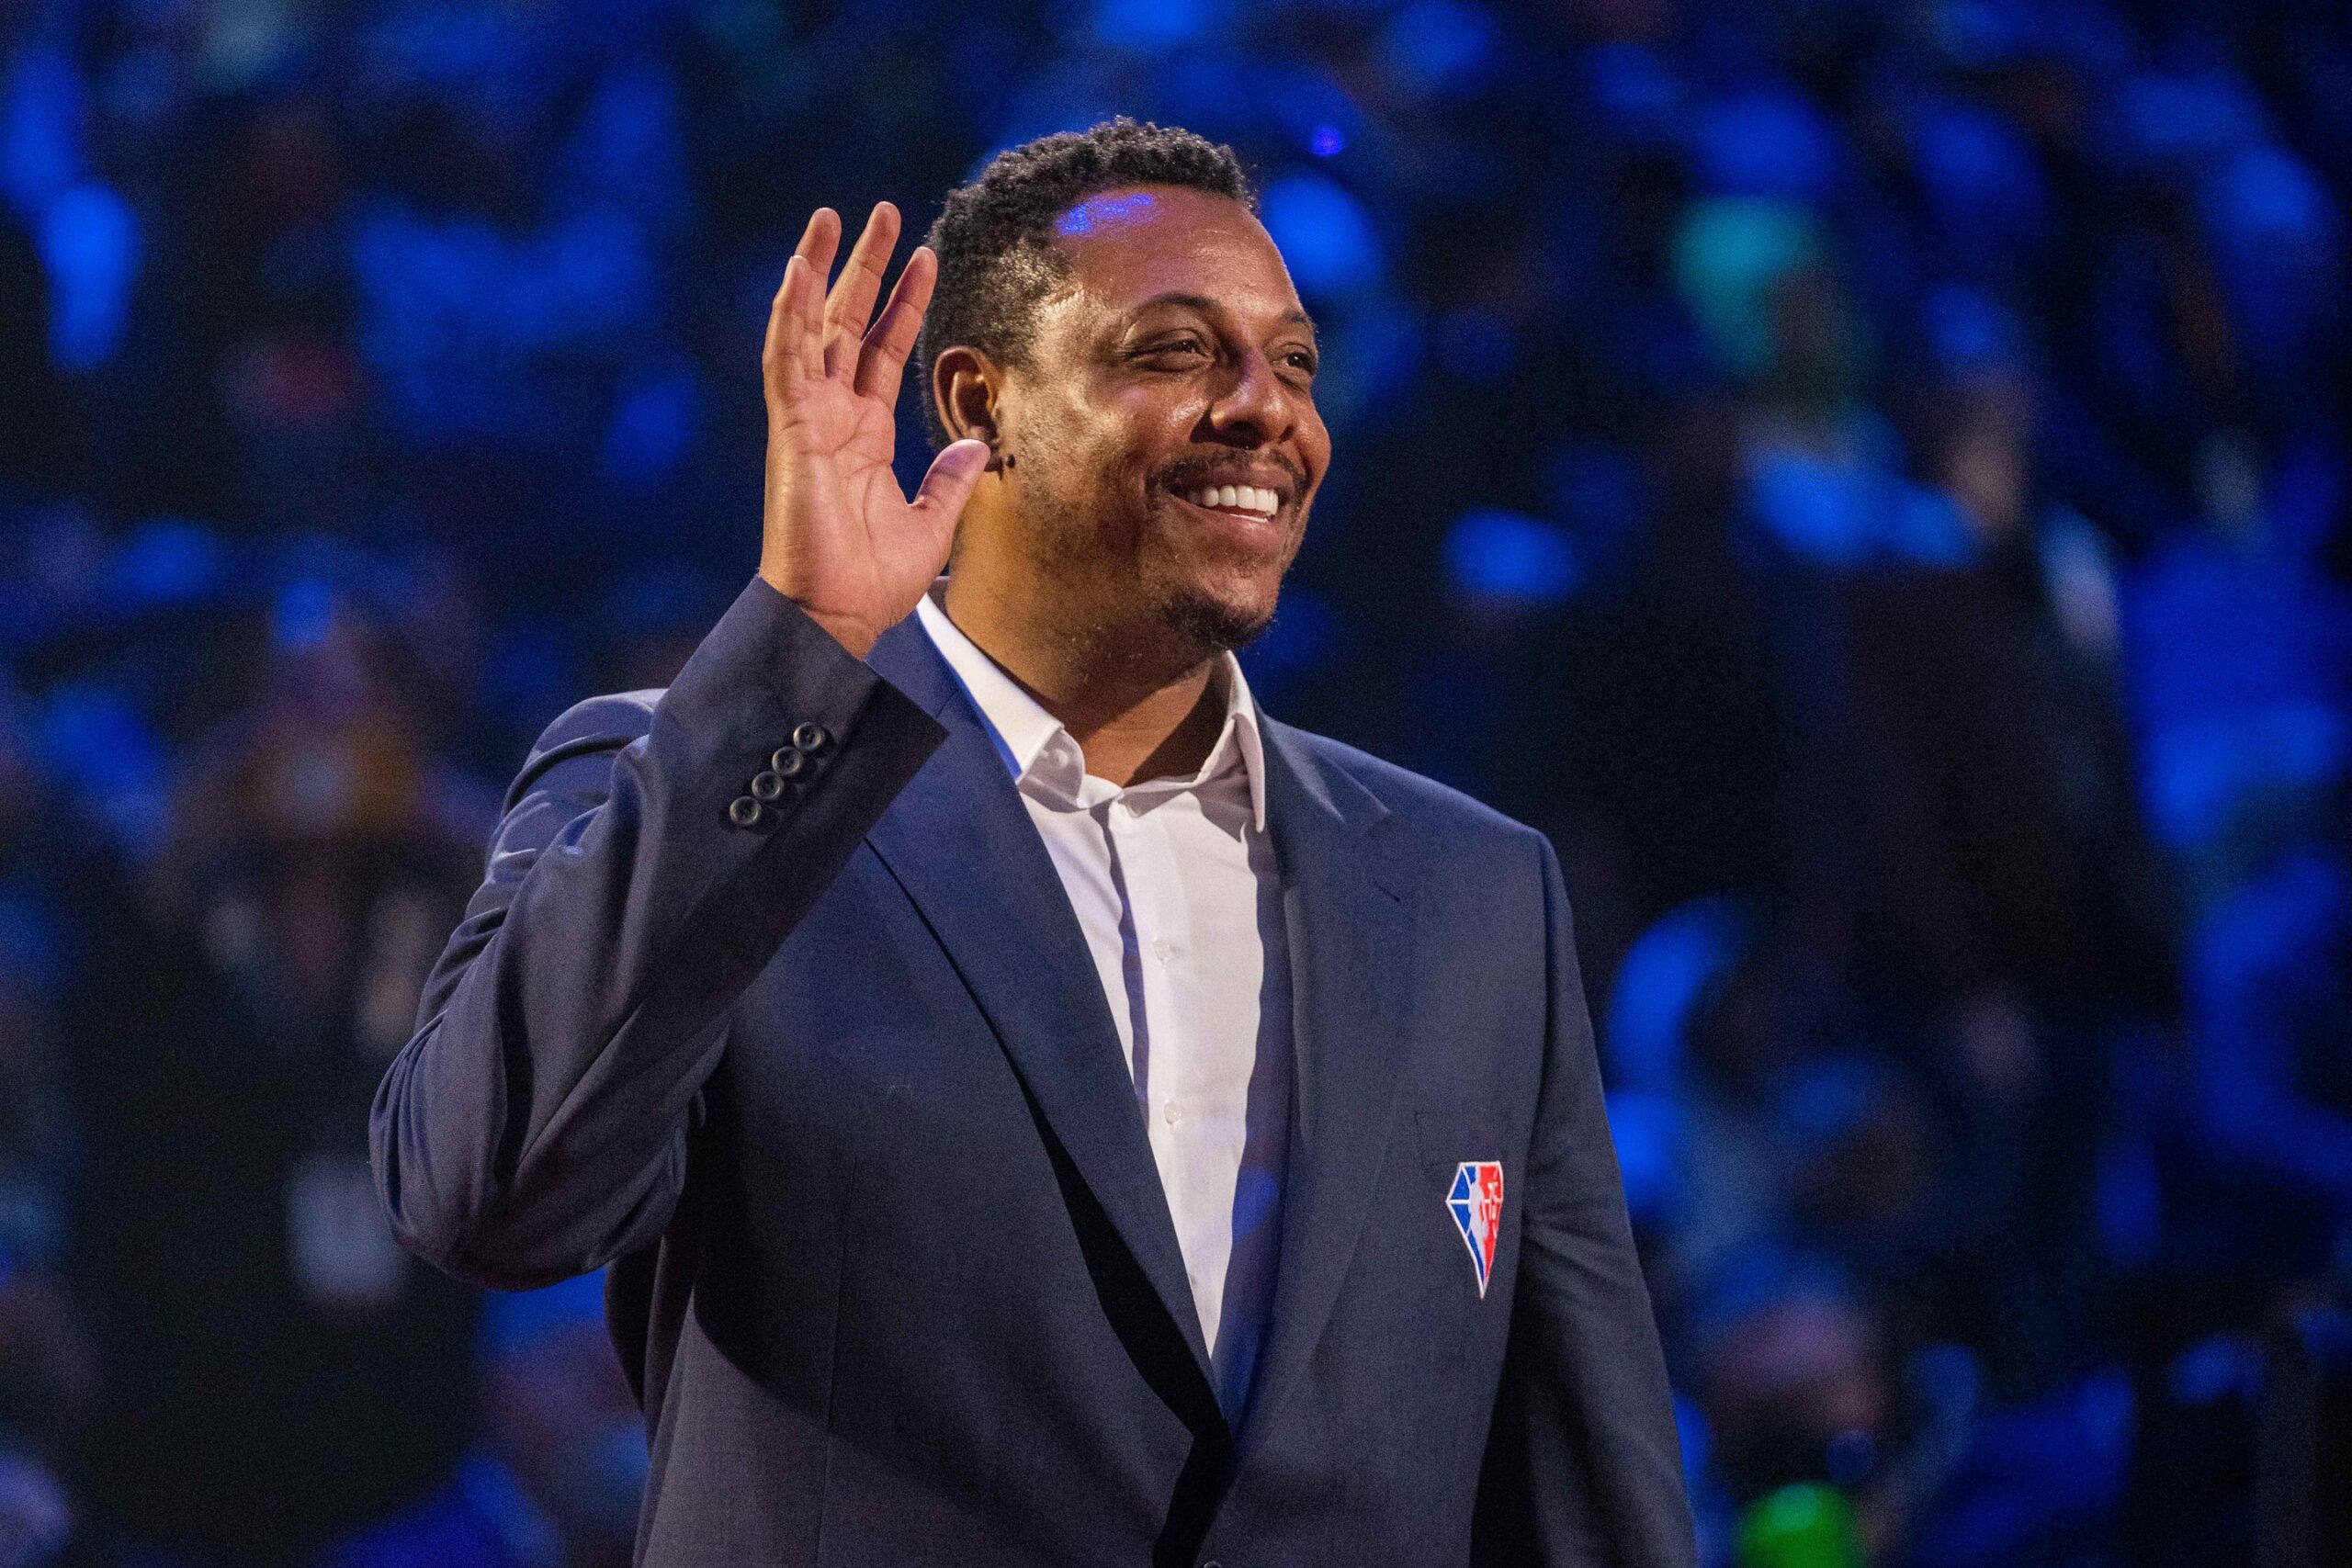 NBA great Paul Pierce is honored for being selected to the NBA 75th Anniversary Team during halftime in the 2022 NBA All-Star Game at Rocket Mortgage FieldHouse.